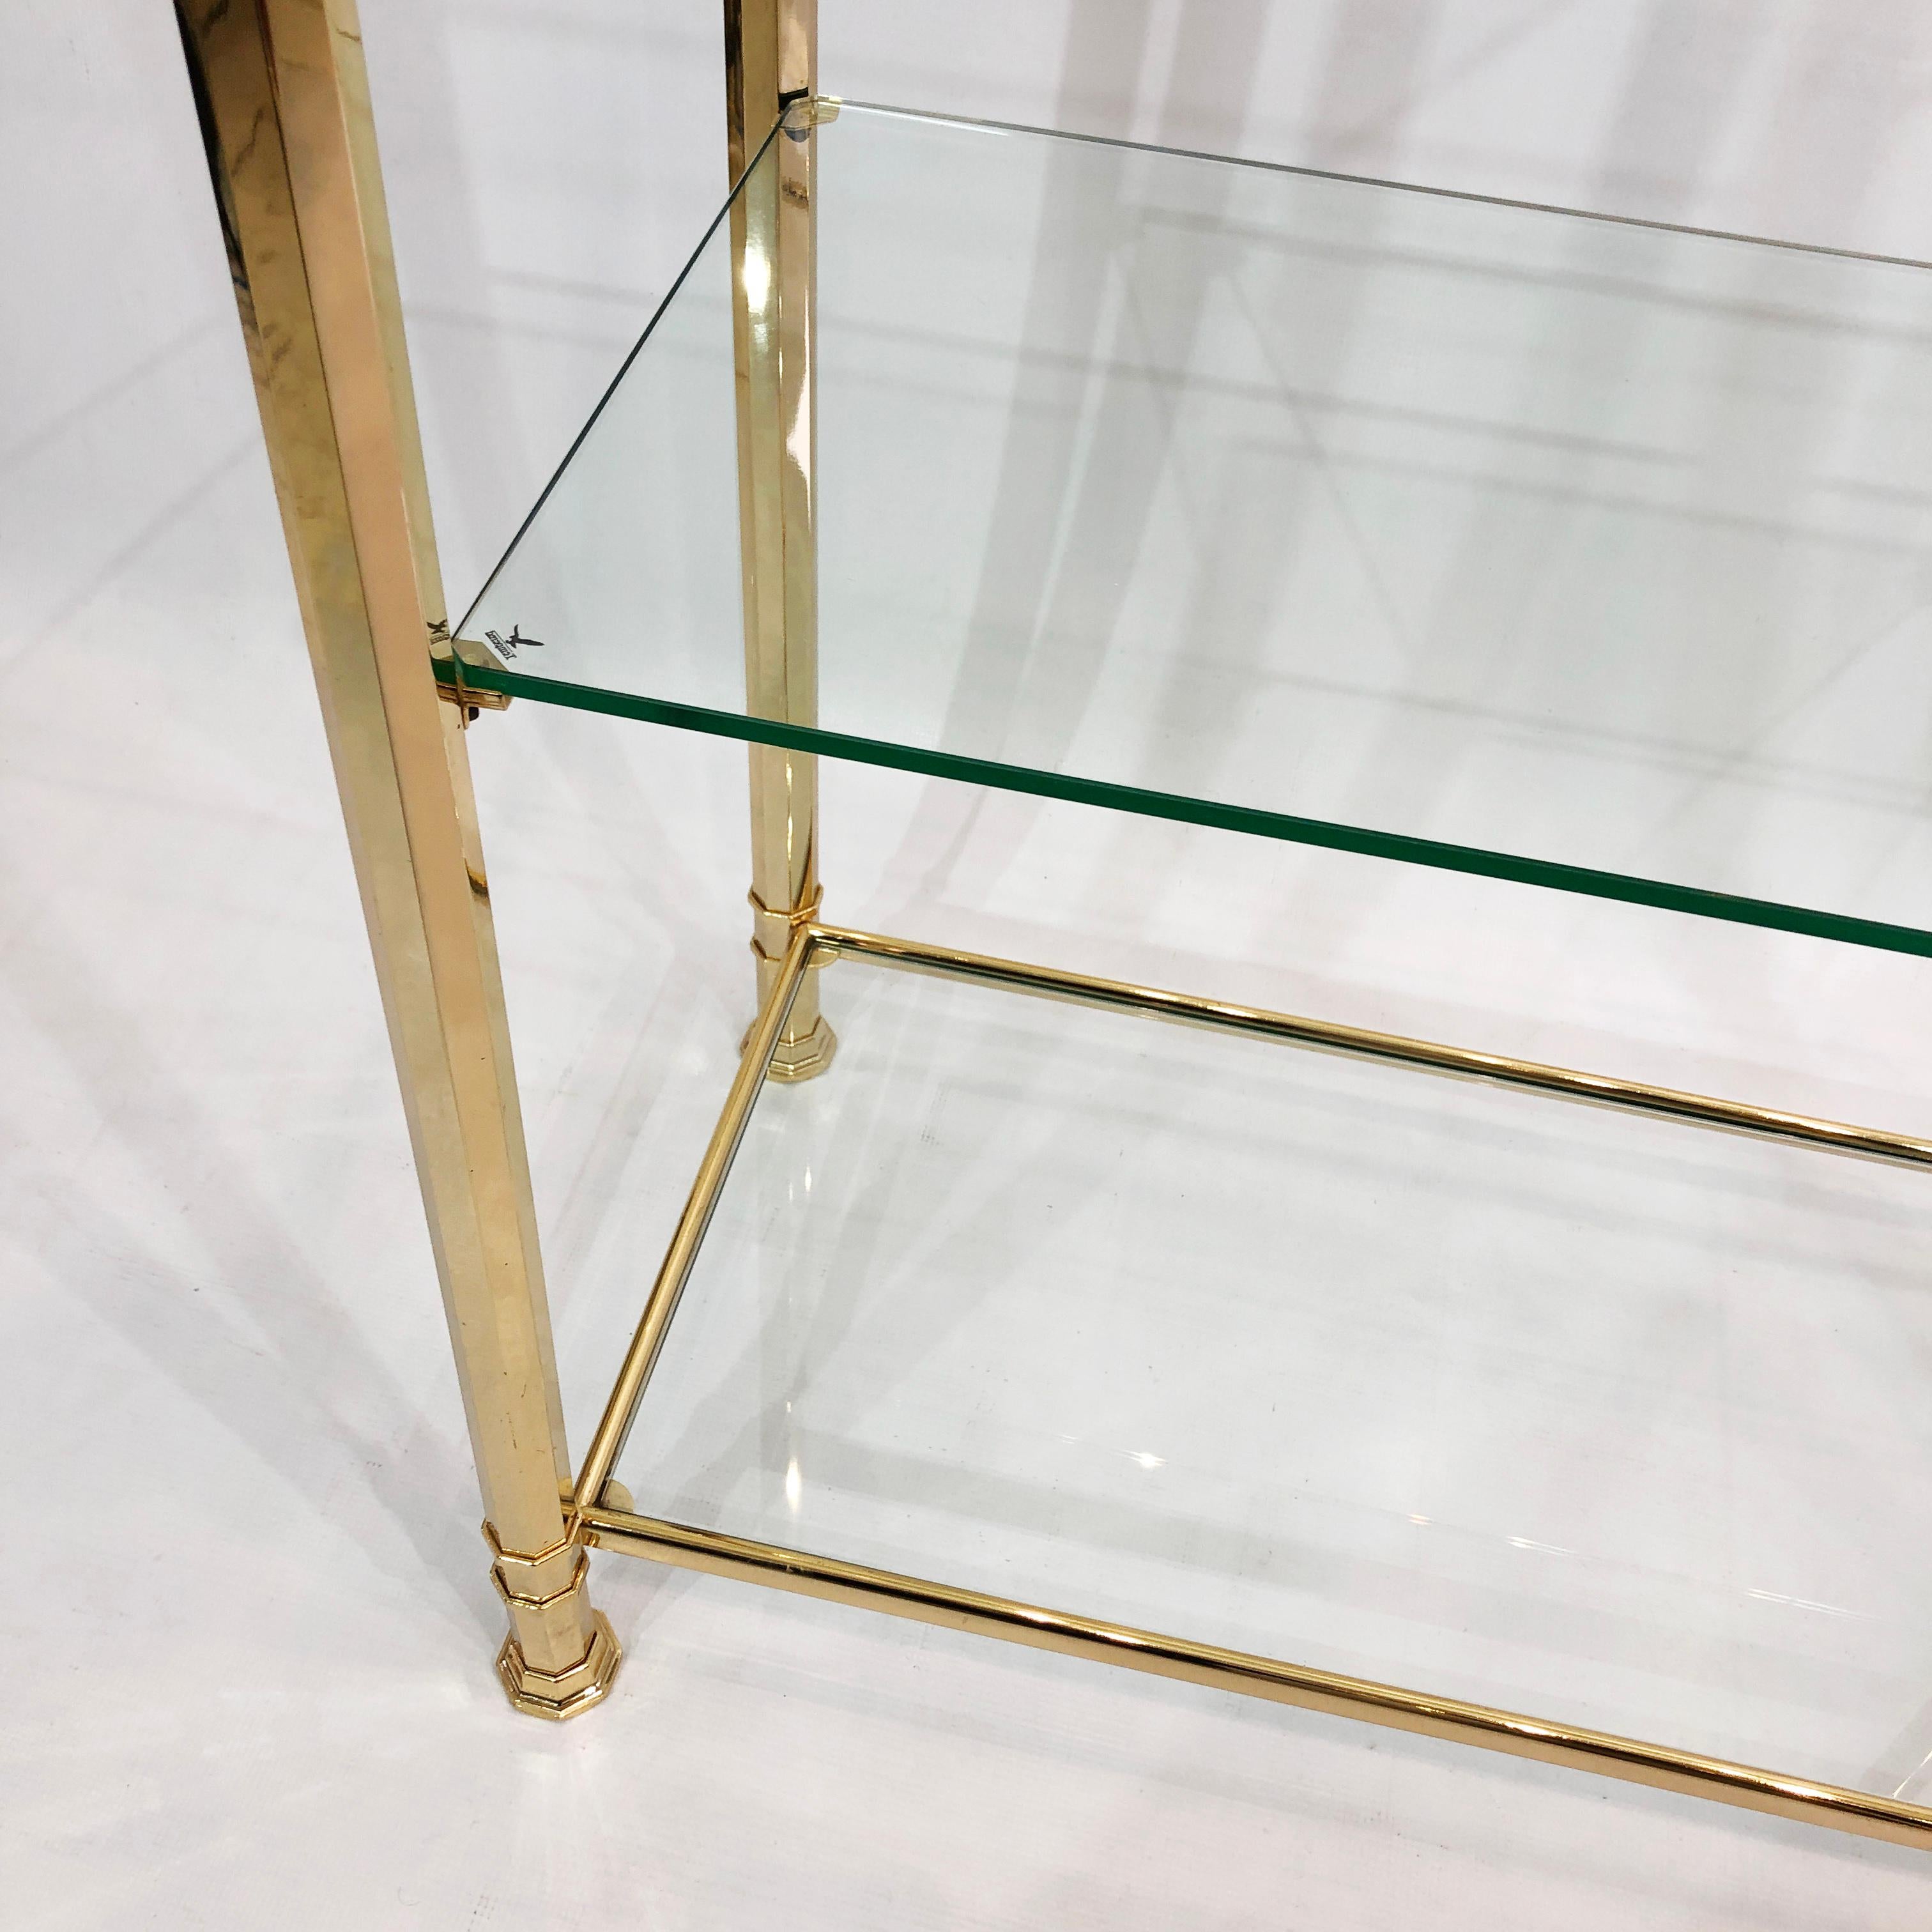 Kesterport Gold Glass Polygonal Etagere Brass Shelving 1980s Display Unit In Good Condition For Sale In London, GB